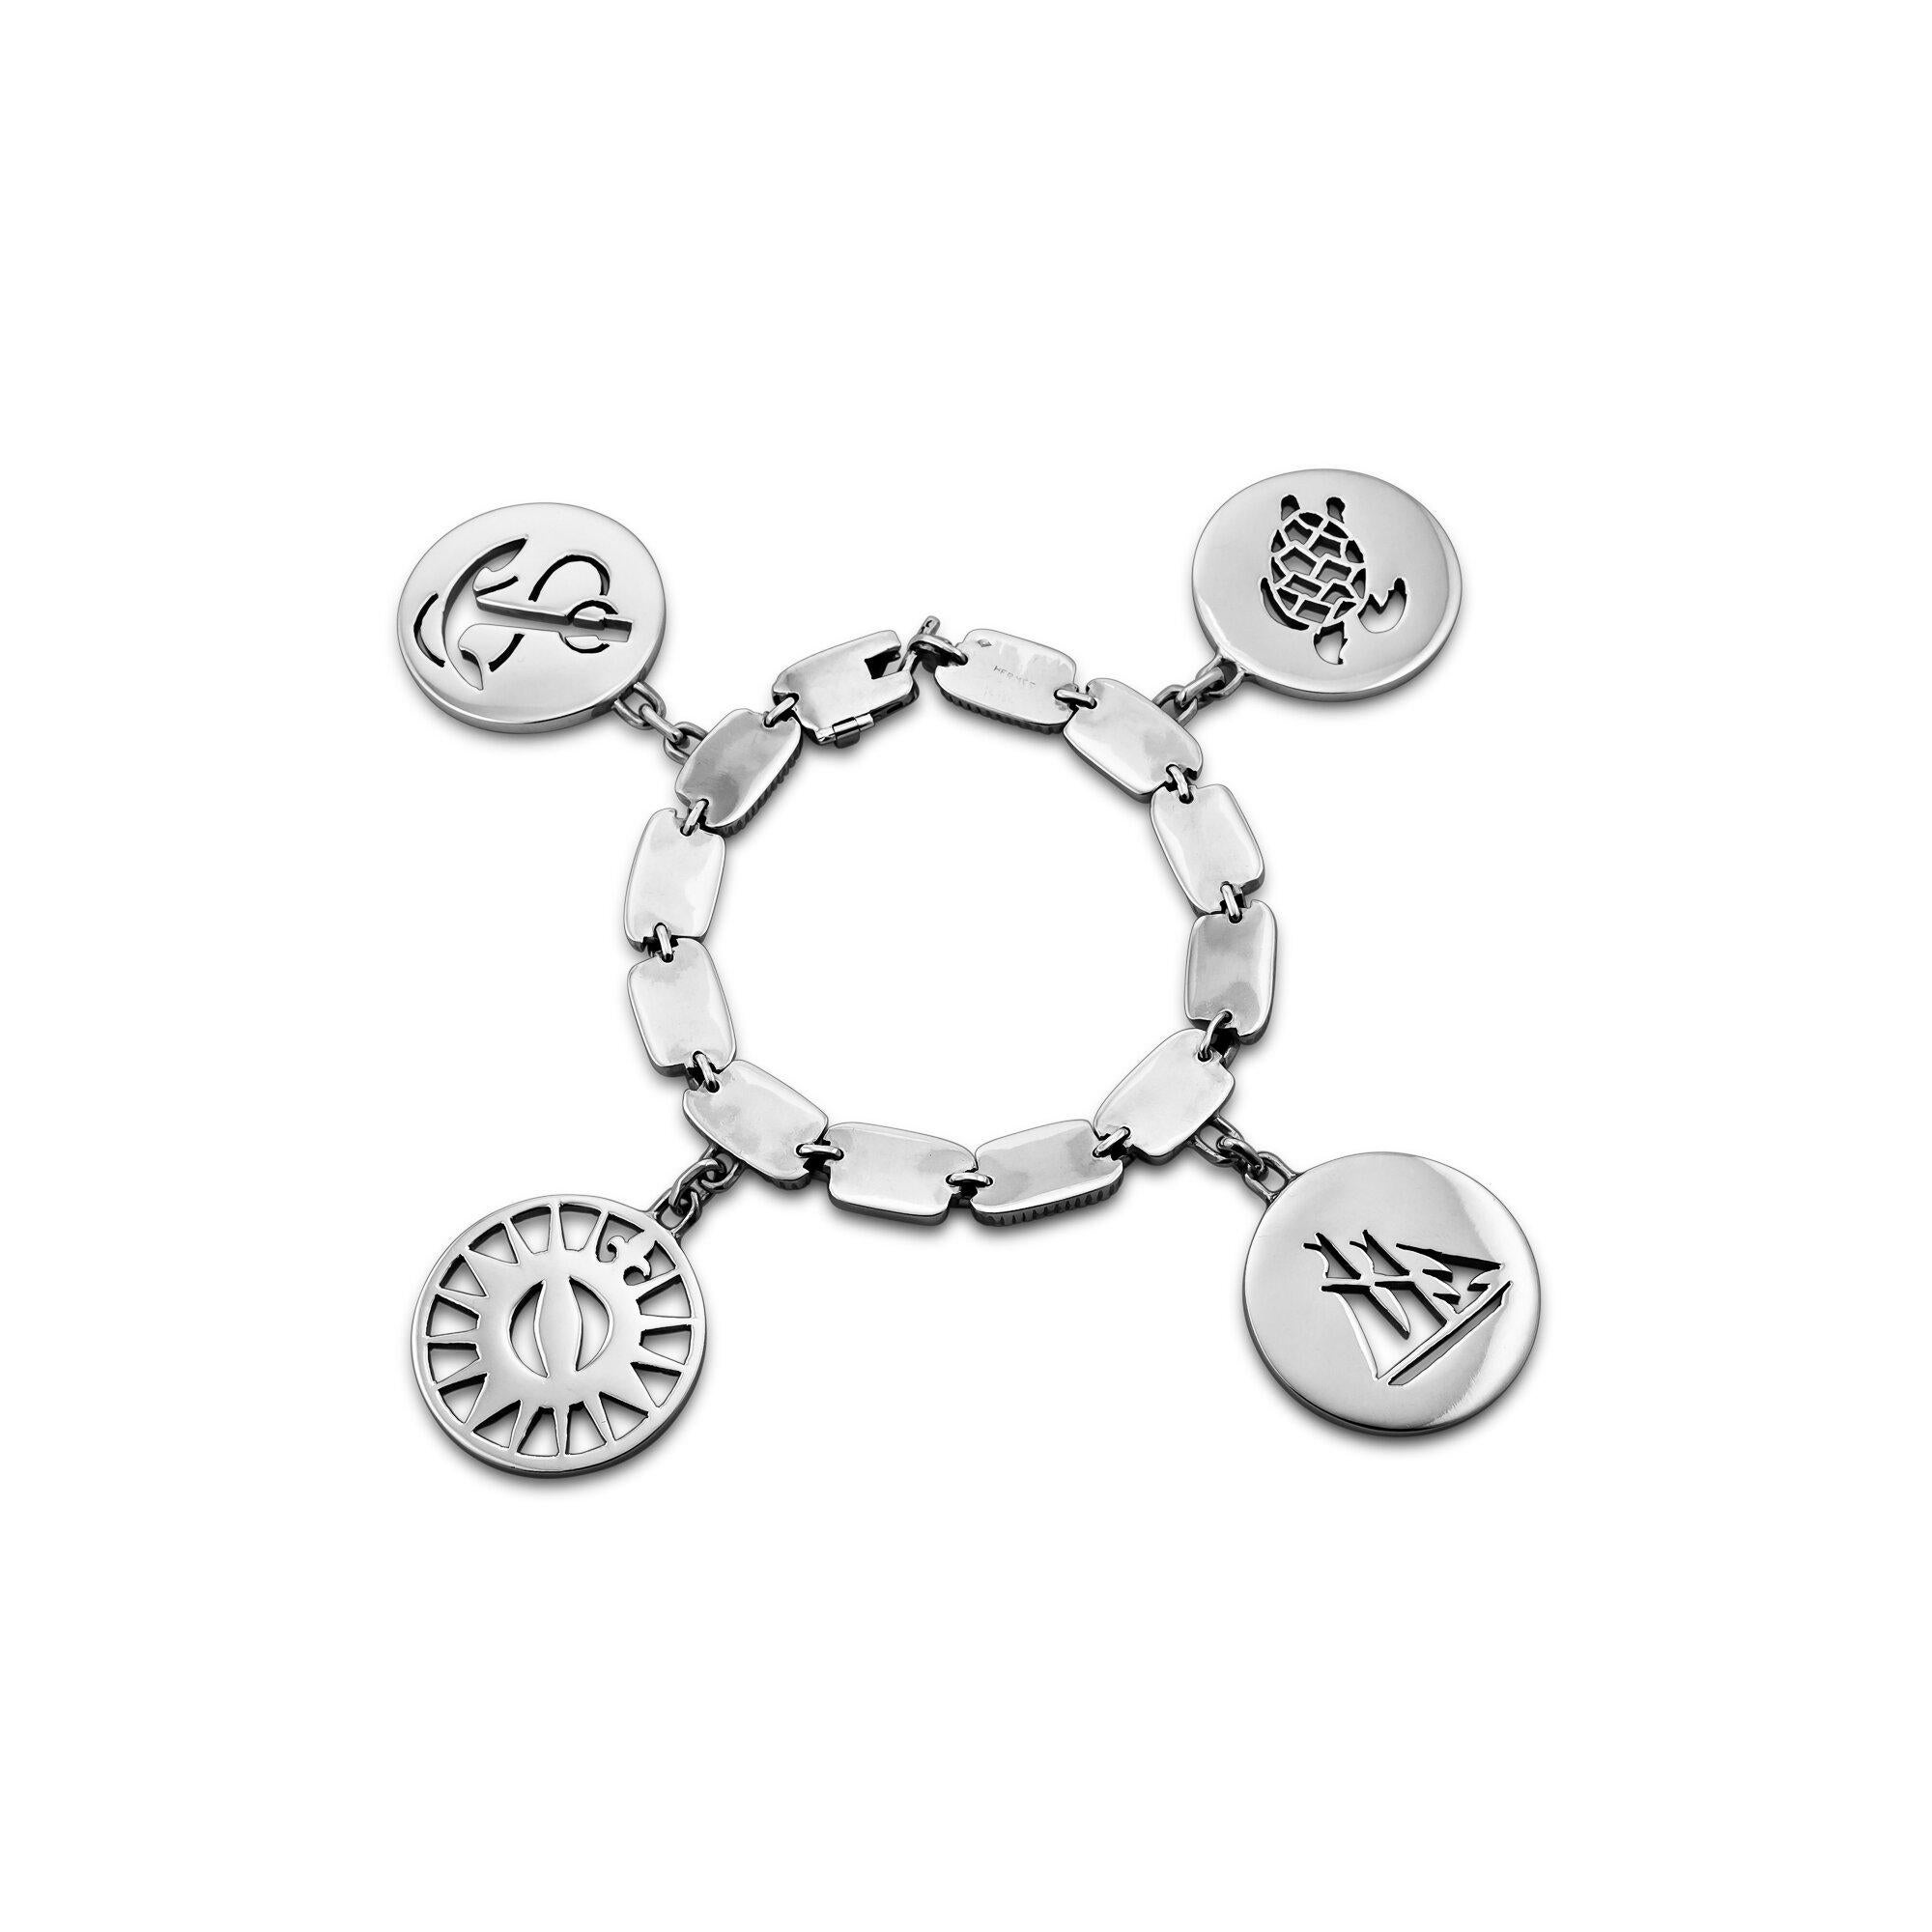 It will always be 'plain sailing' when wearing this incredible vintage Hermes Paris four charm Nautical link bracelet.  With an anchor, a compass, a sailboat, and a sea turtle pierced disc charm hanging from a flat link/rope chain bracelet, you will